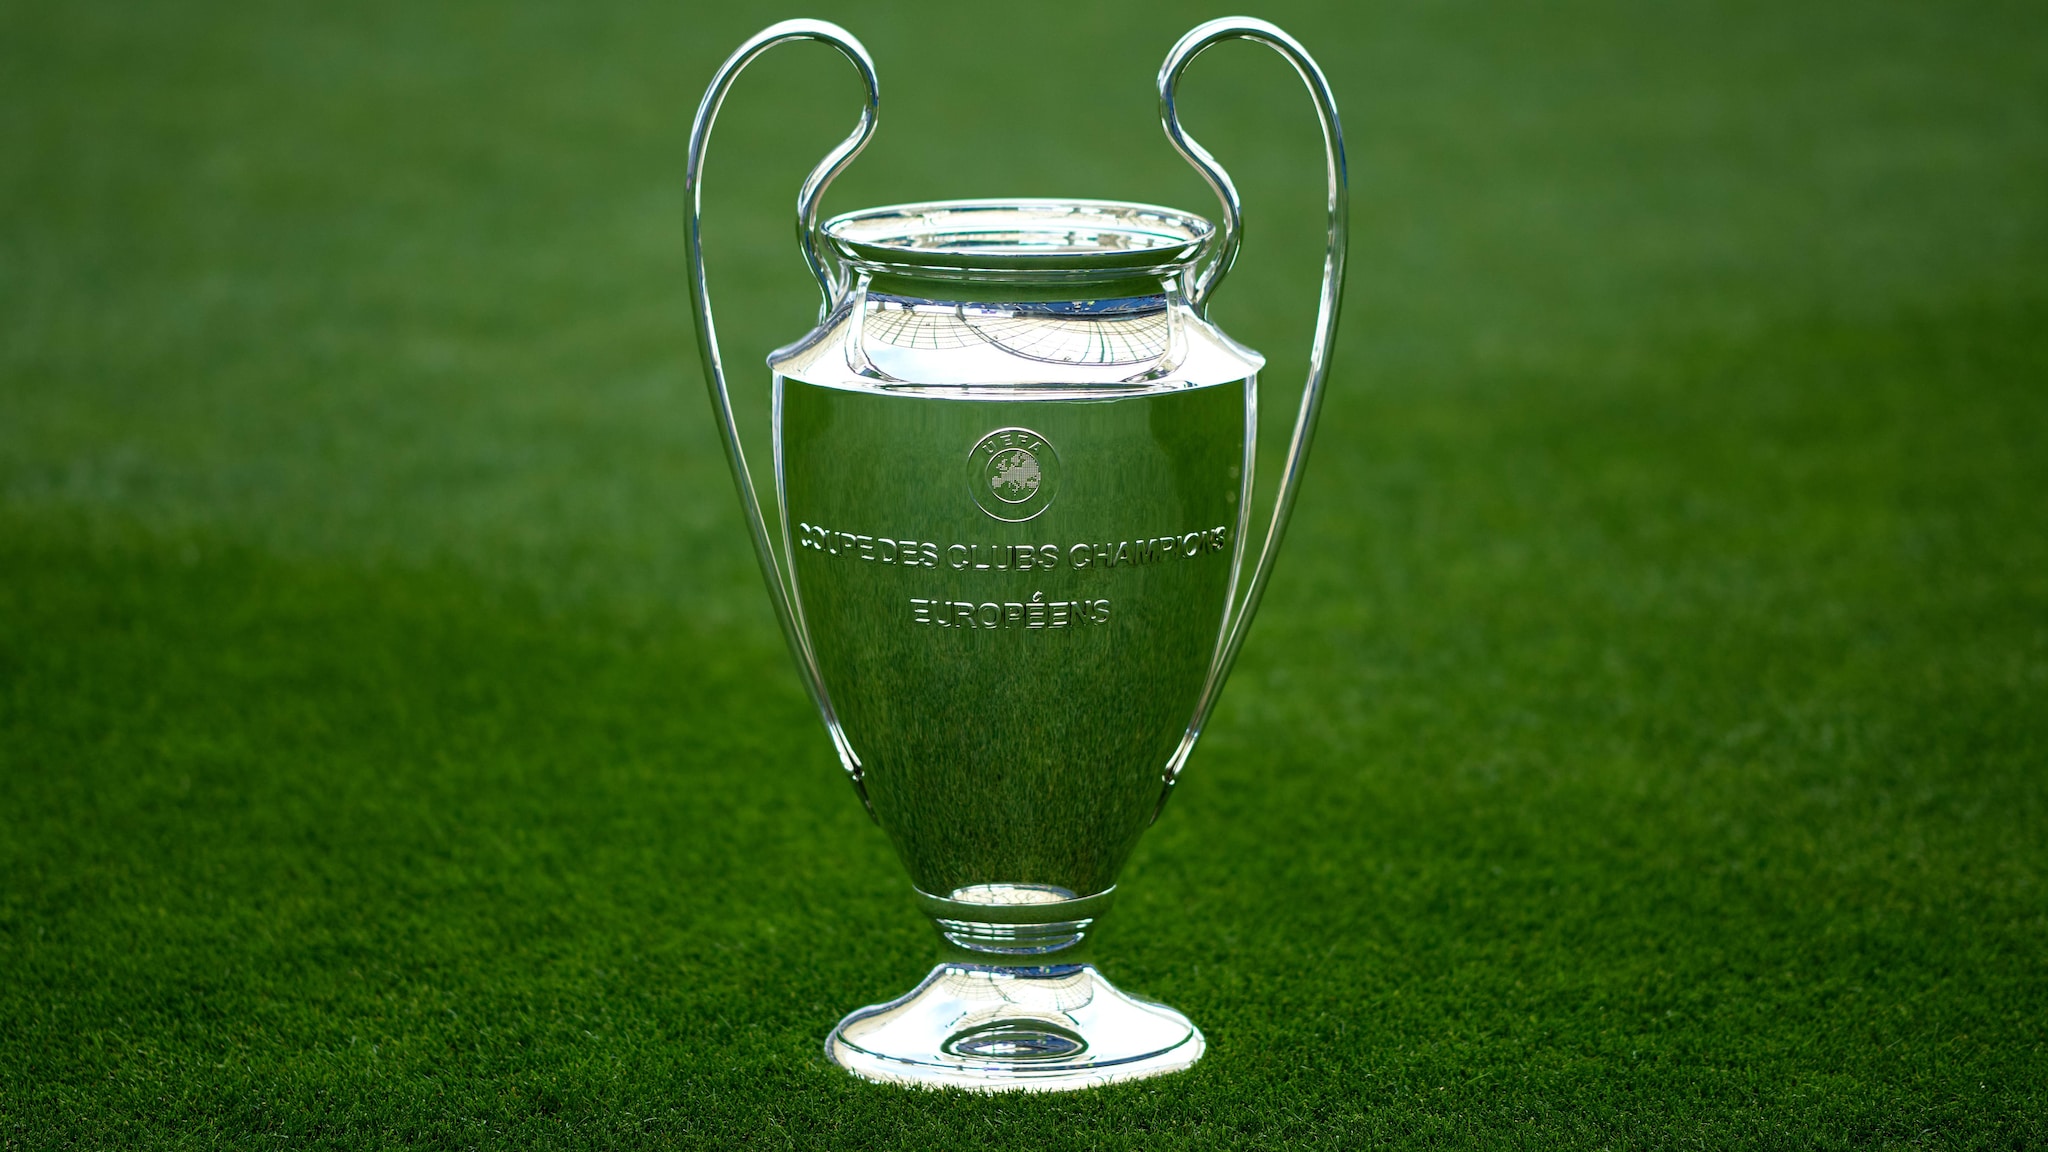 UEFA Champions League 2021: Pots confirmed, watch live streaming